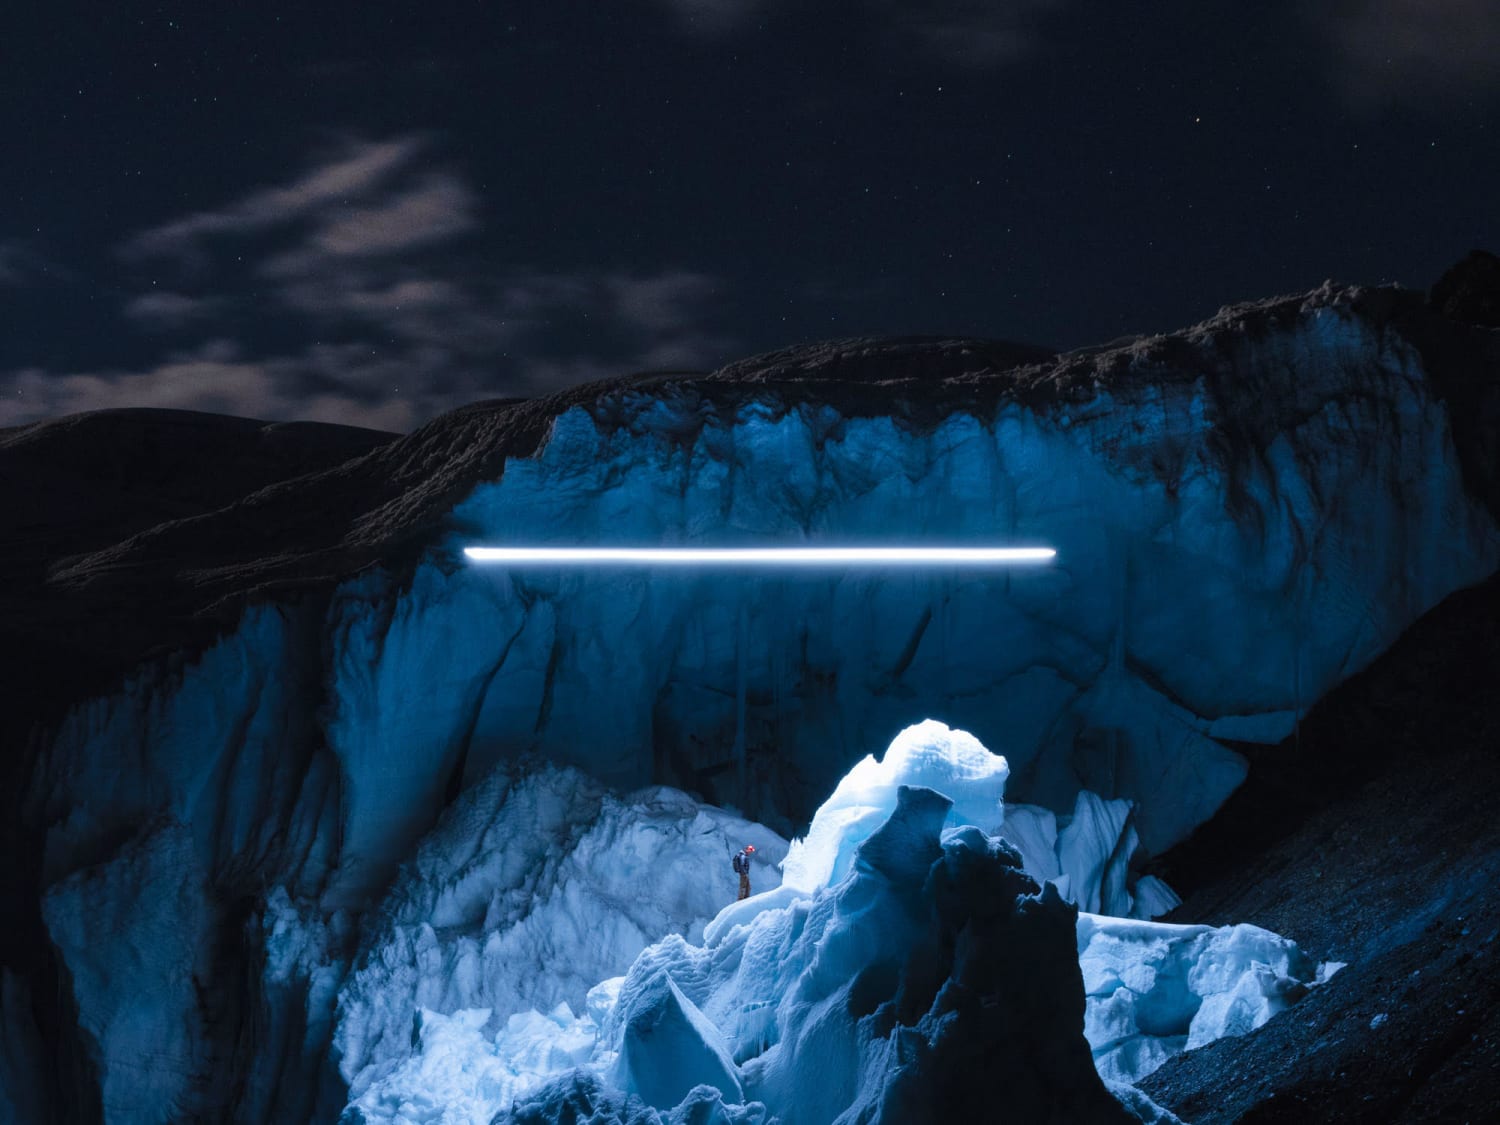 A Rare Tropical Glacier Captured at Night in Drone-Illuminated Photographs by Reuben Wu — Colossal